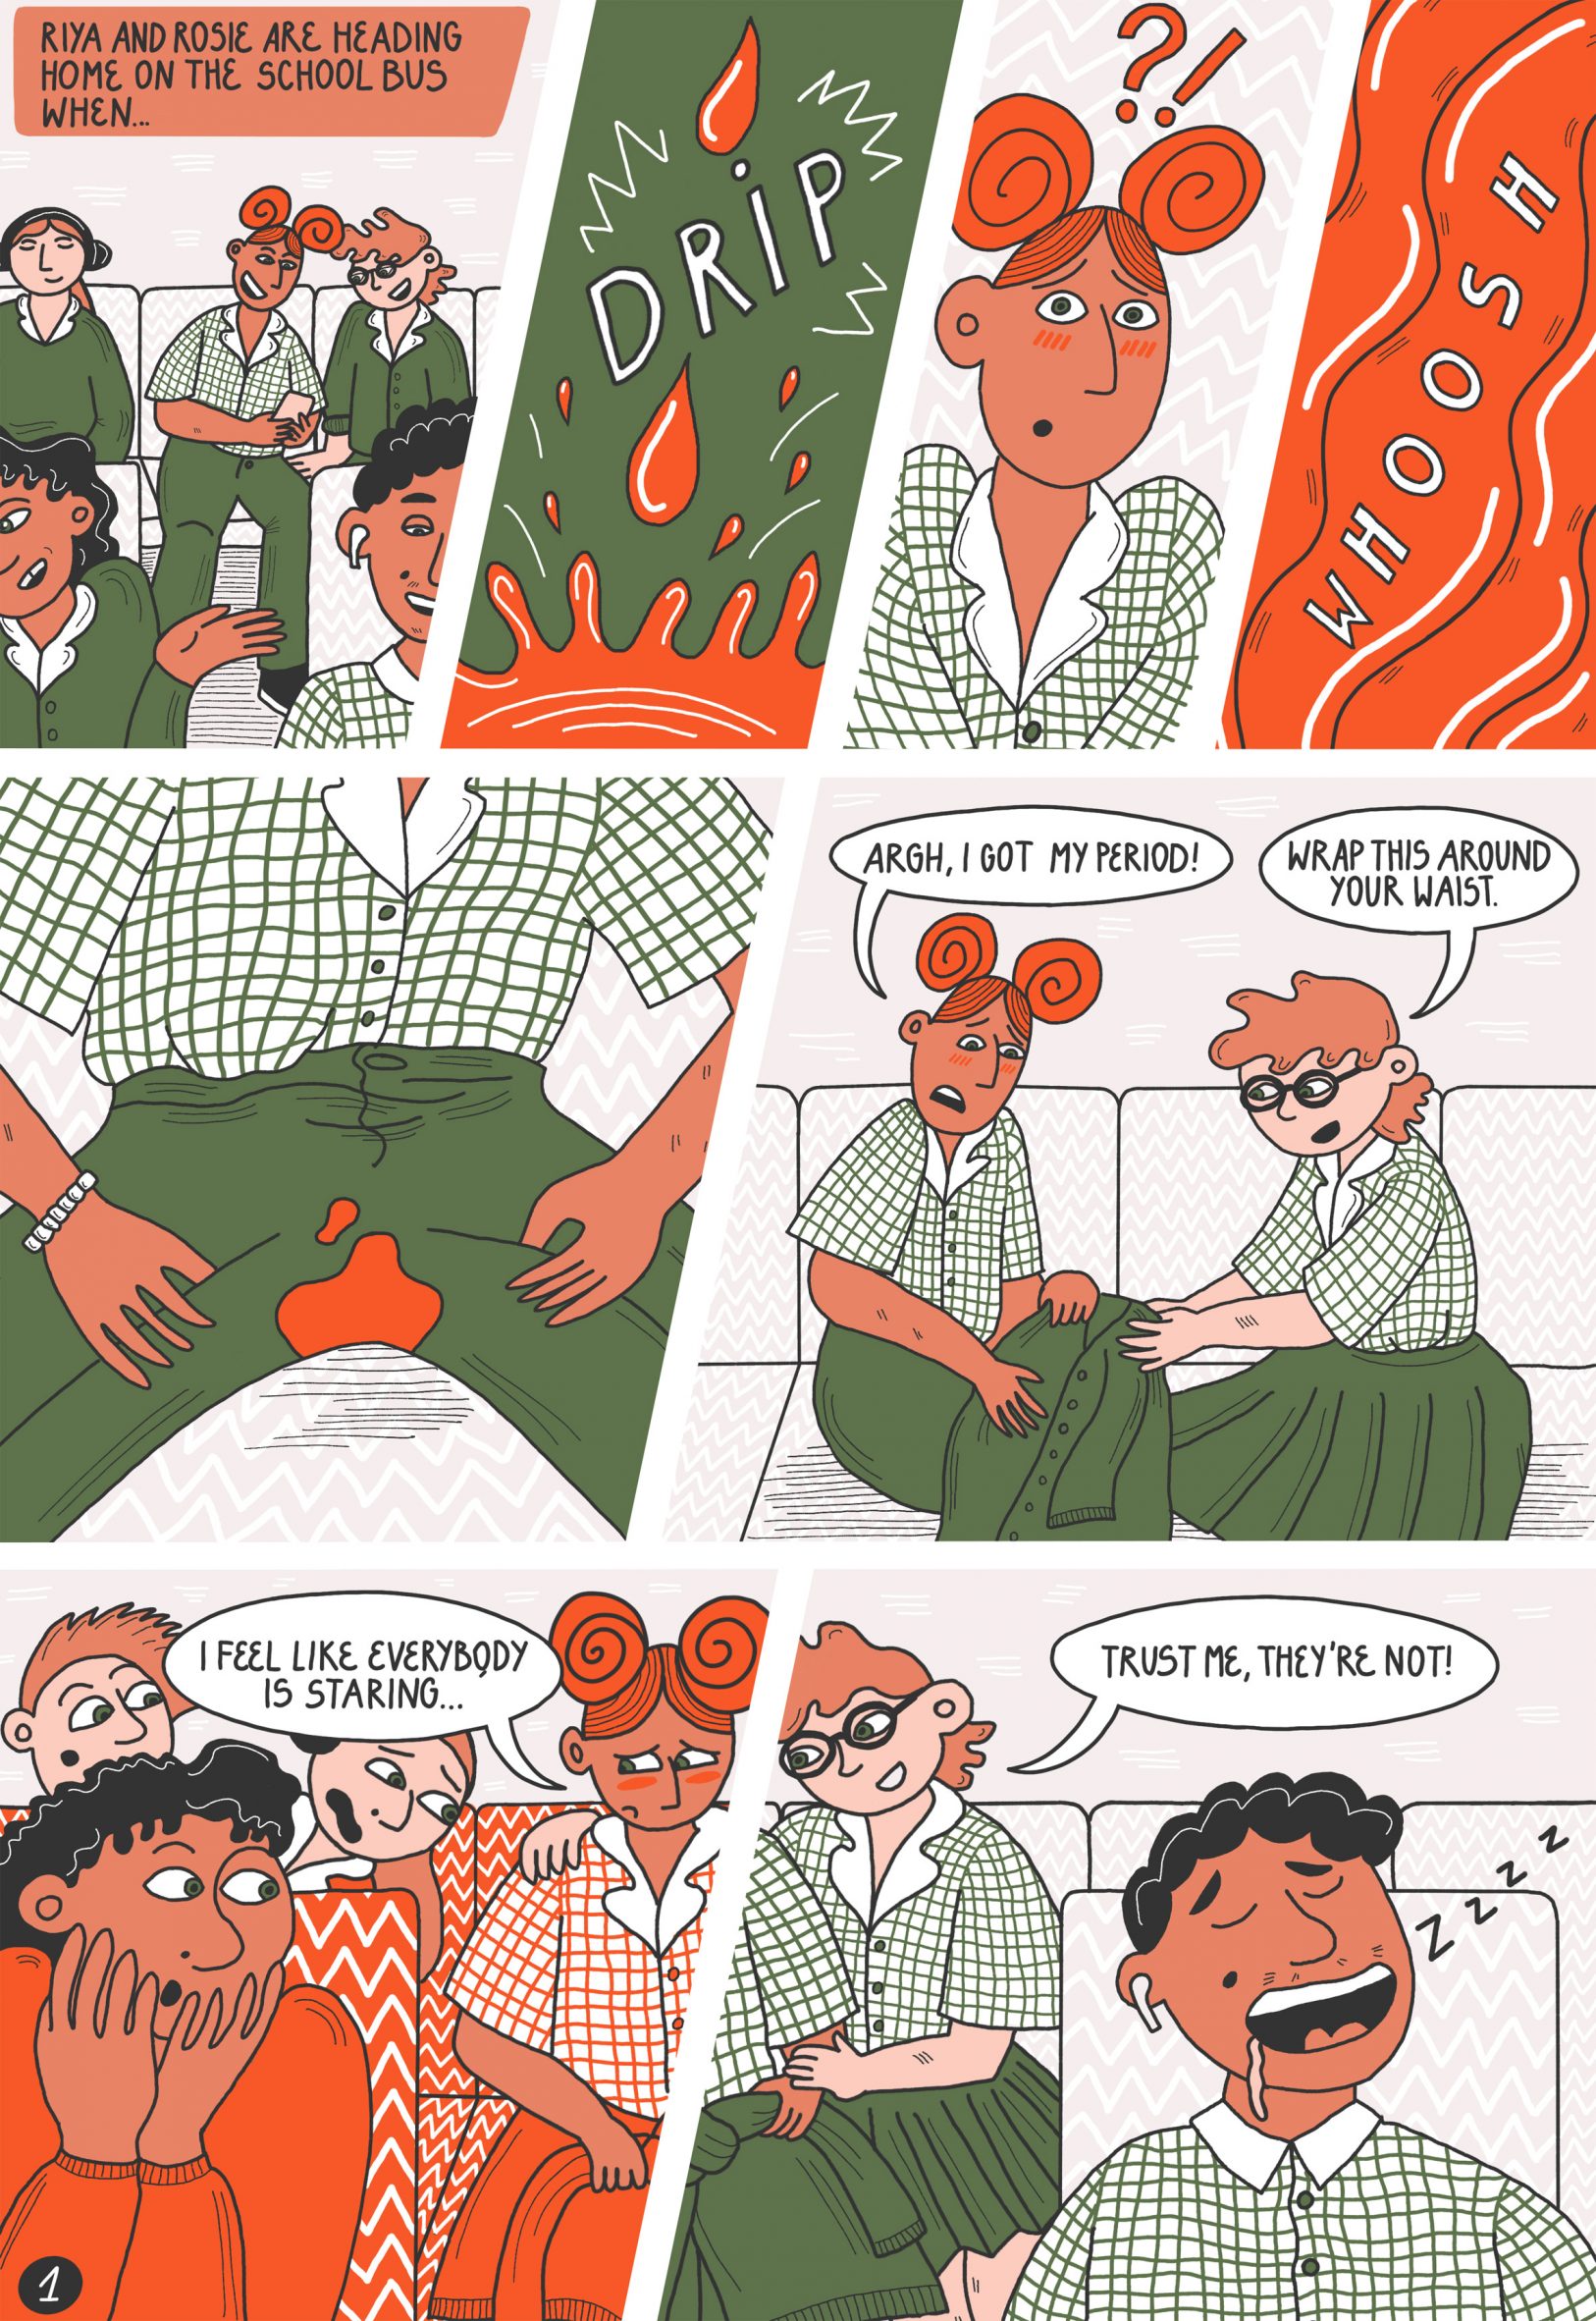 Justyna Green's comic as part of Modibodi's First Period Kit, which depicts a teenage girl getting their first period